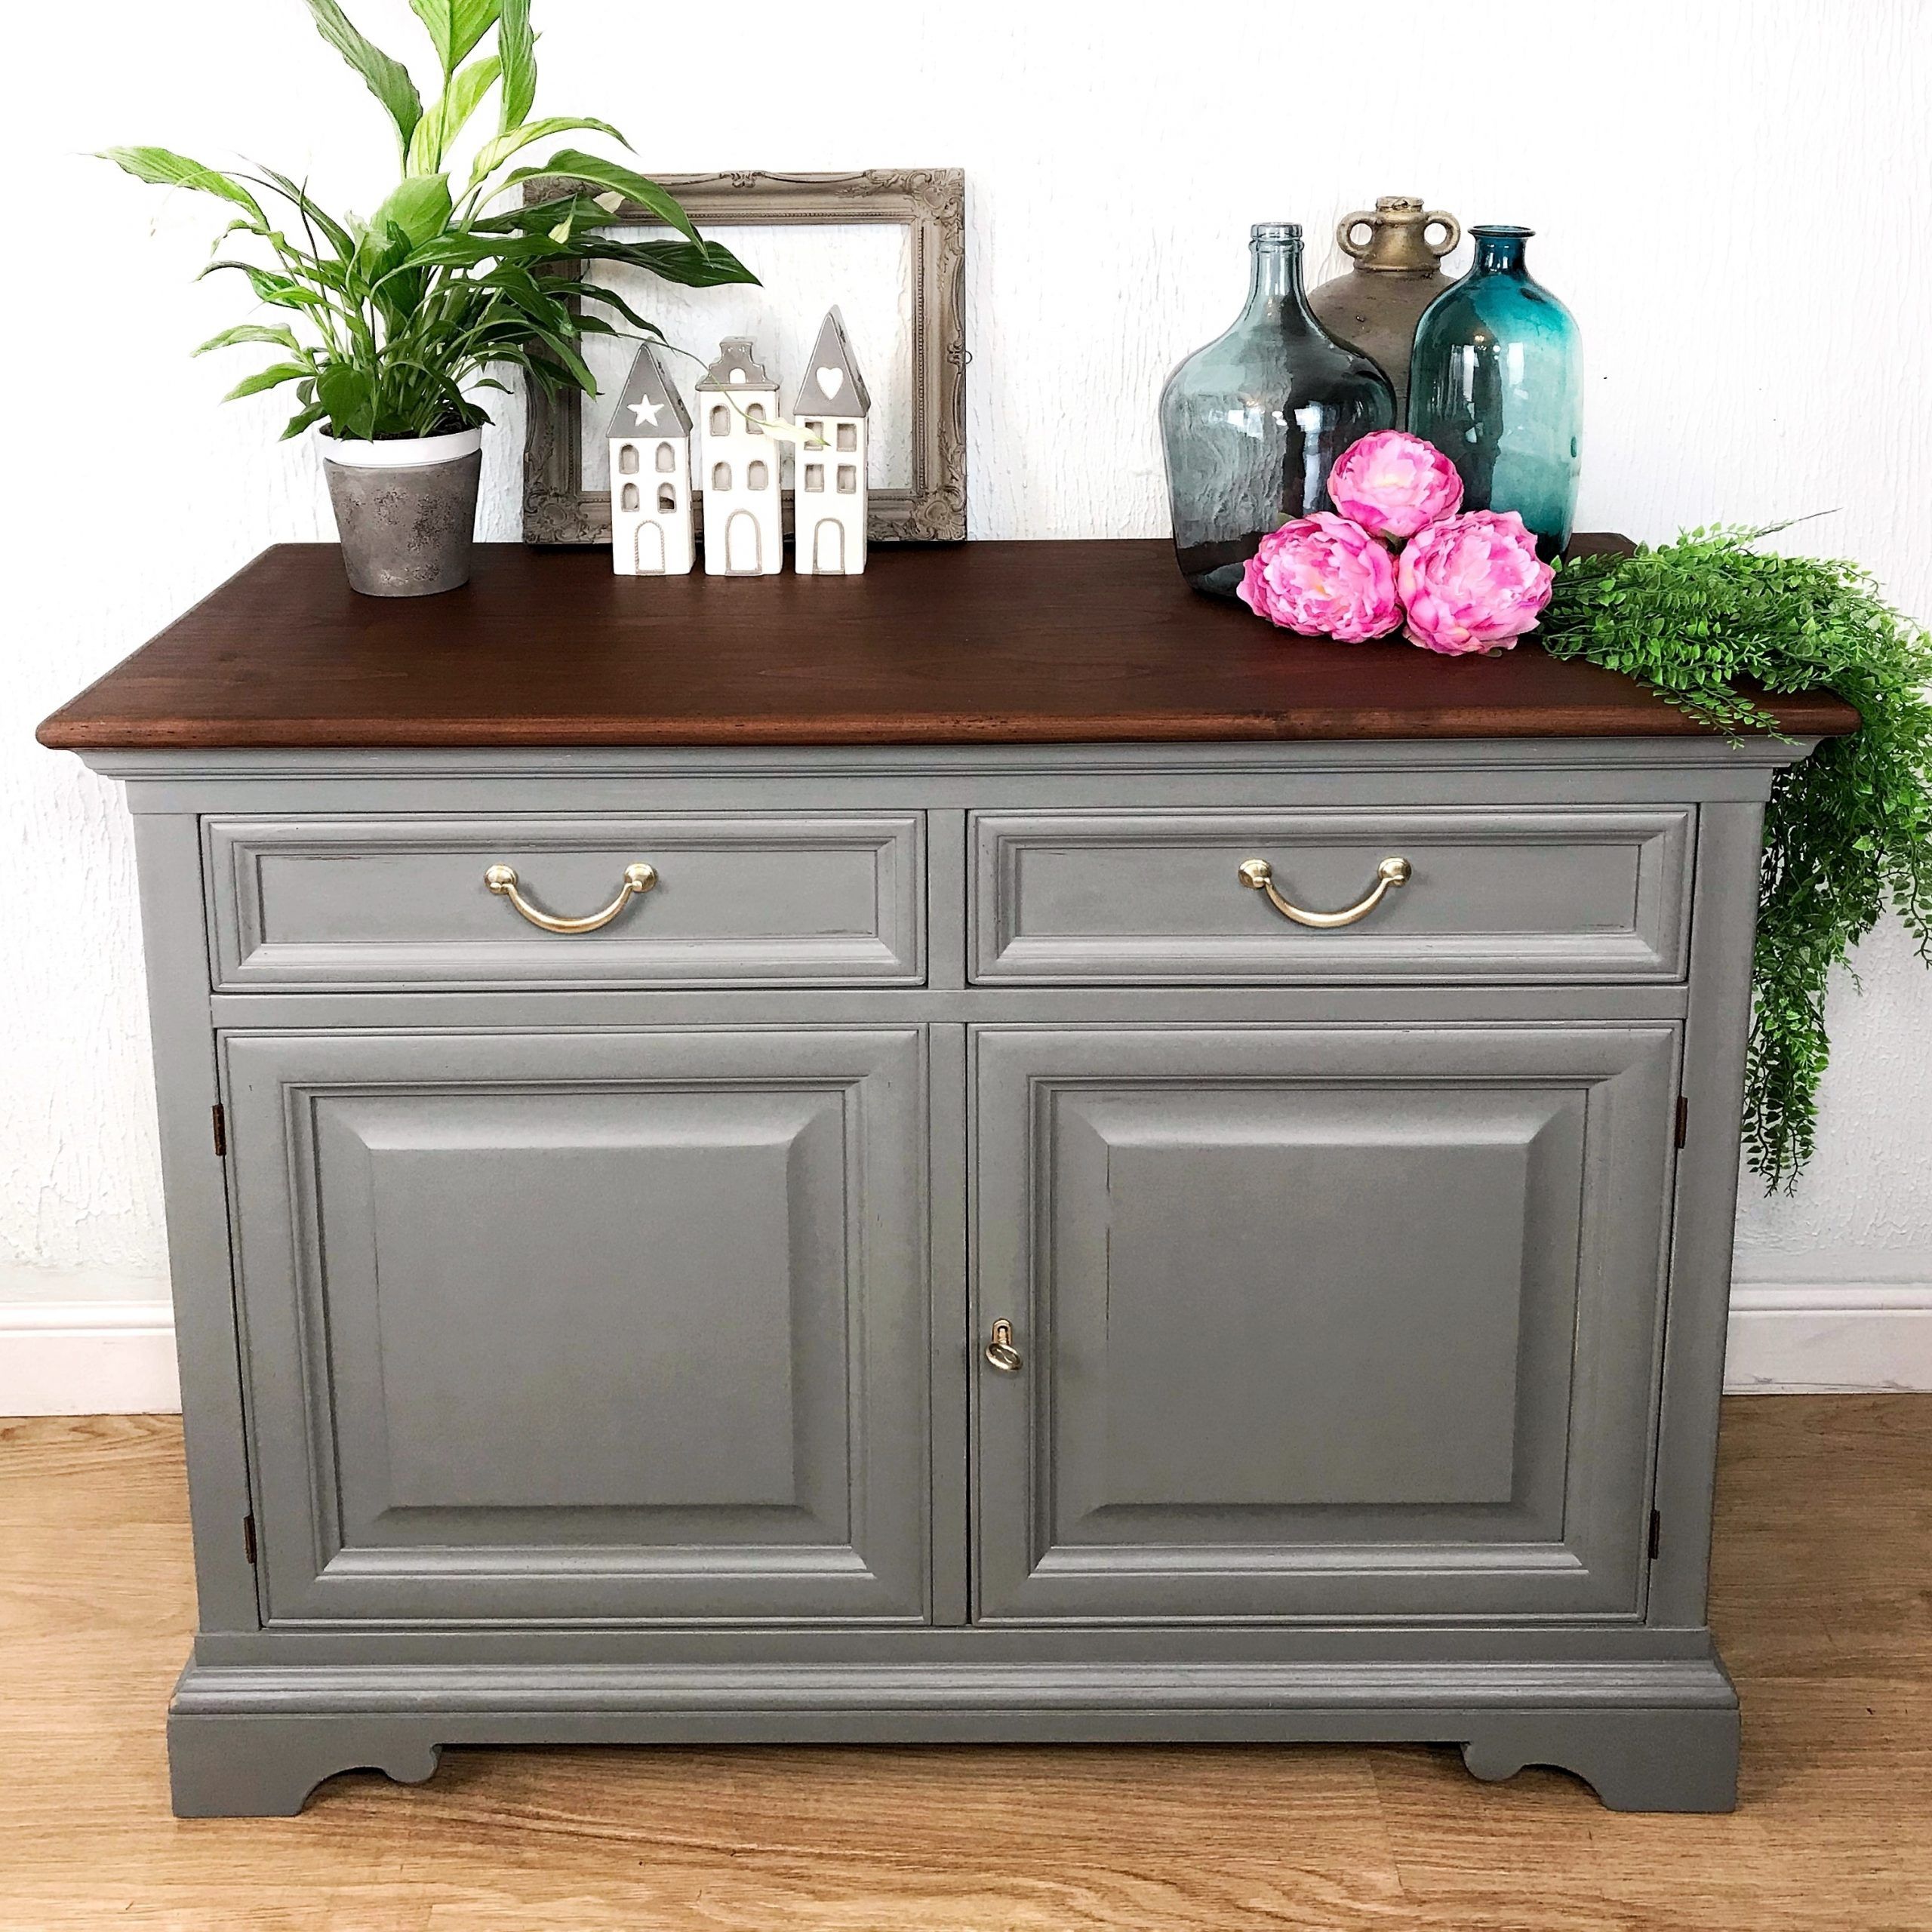 Modern Farmhouse Rustic Shabby Chic Painted Grey Sideboard For Shabby Chic Tv Cabinet (View 11 of 15)